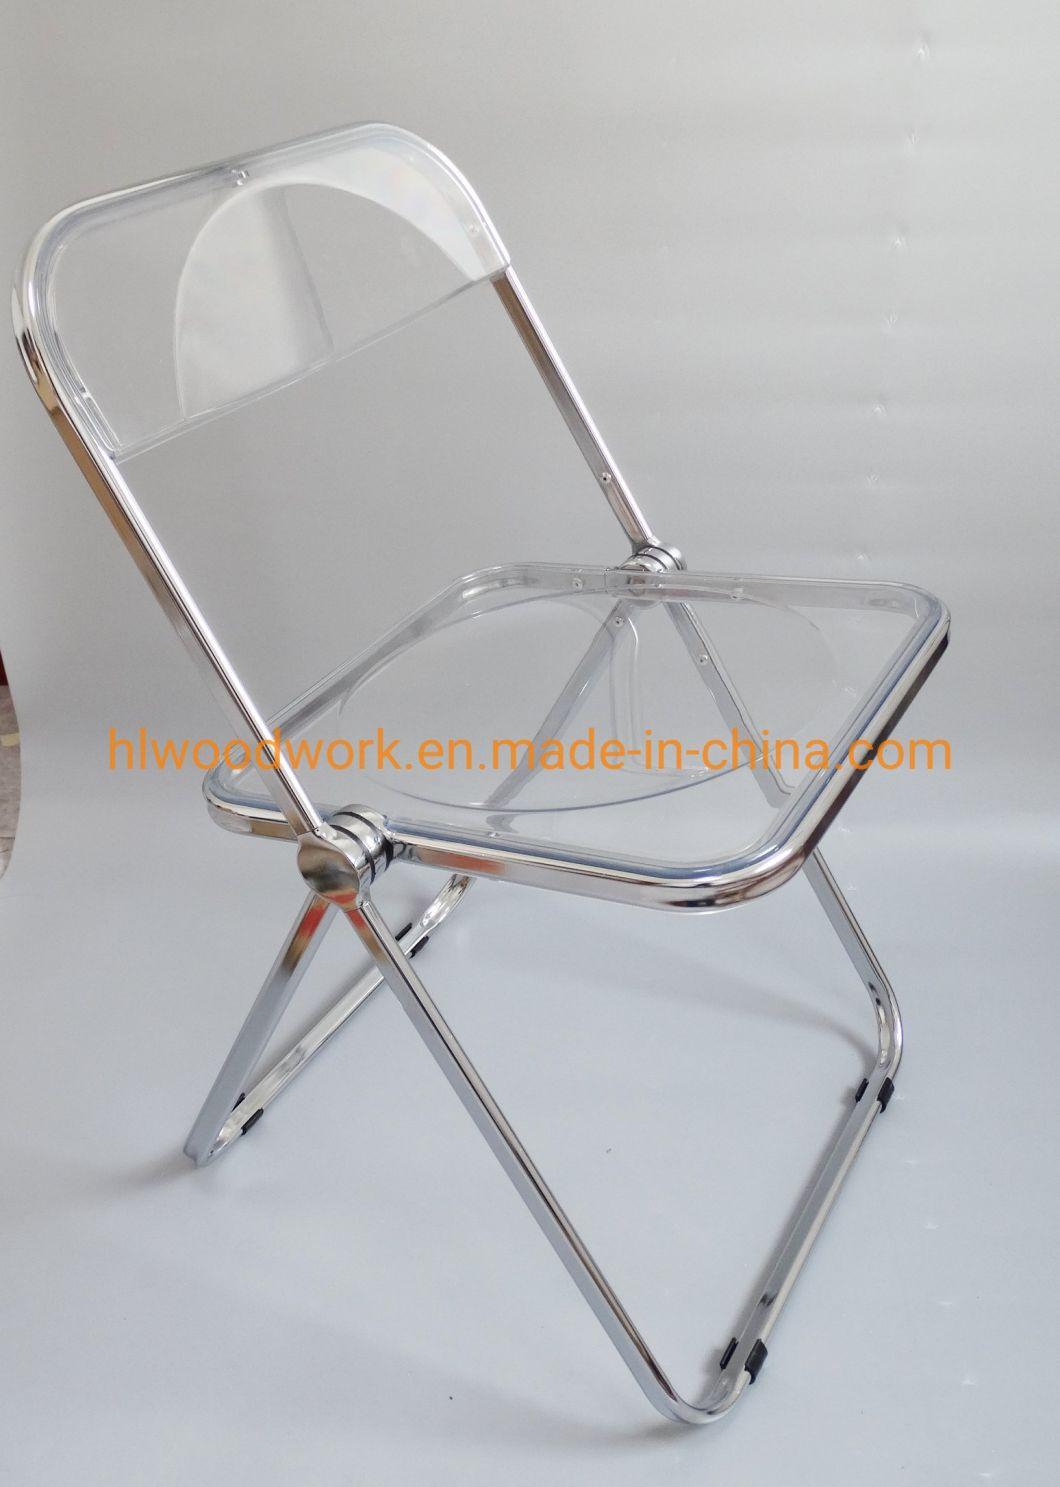 Modern Transparent Grey Folding Chair PC Plastic Dining Room Chair Chrome Frame Office Bar Dining Leisure Banquet Wedding Meeting Chair Plastic Dining Chair